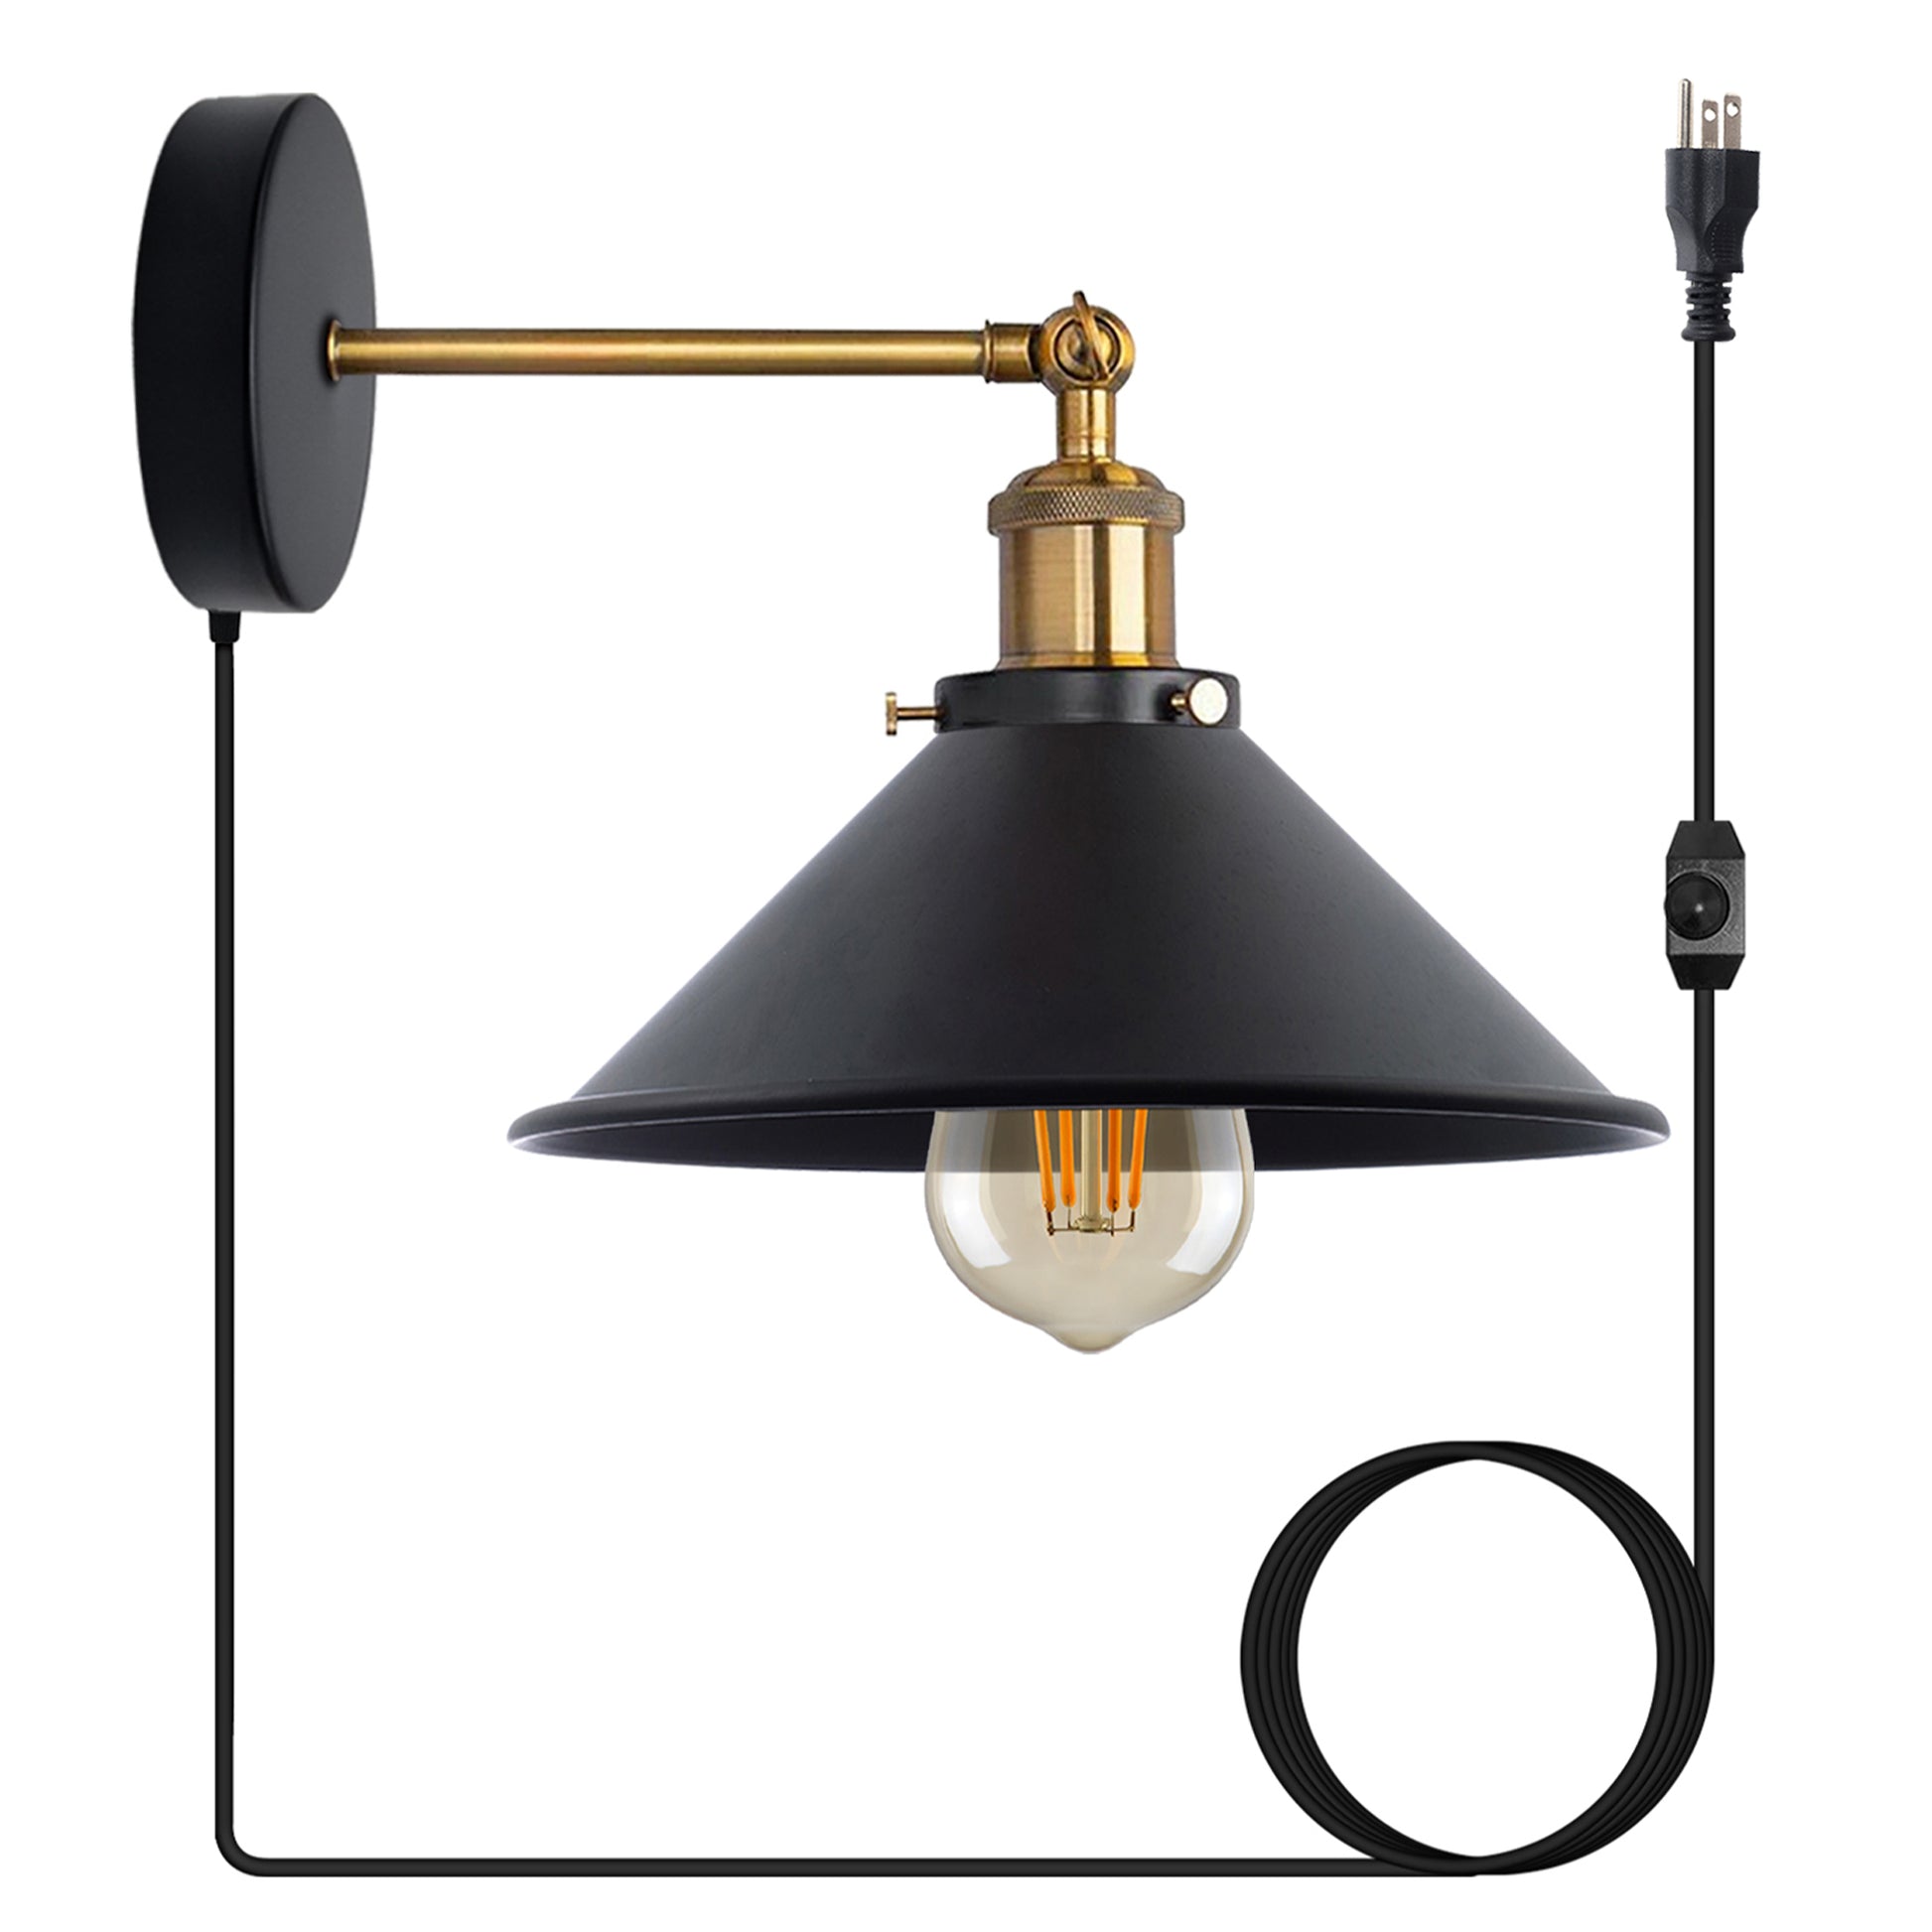 Black Plug-in Wall Light Sconces with Dimmer Switch.JPG